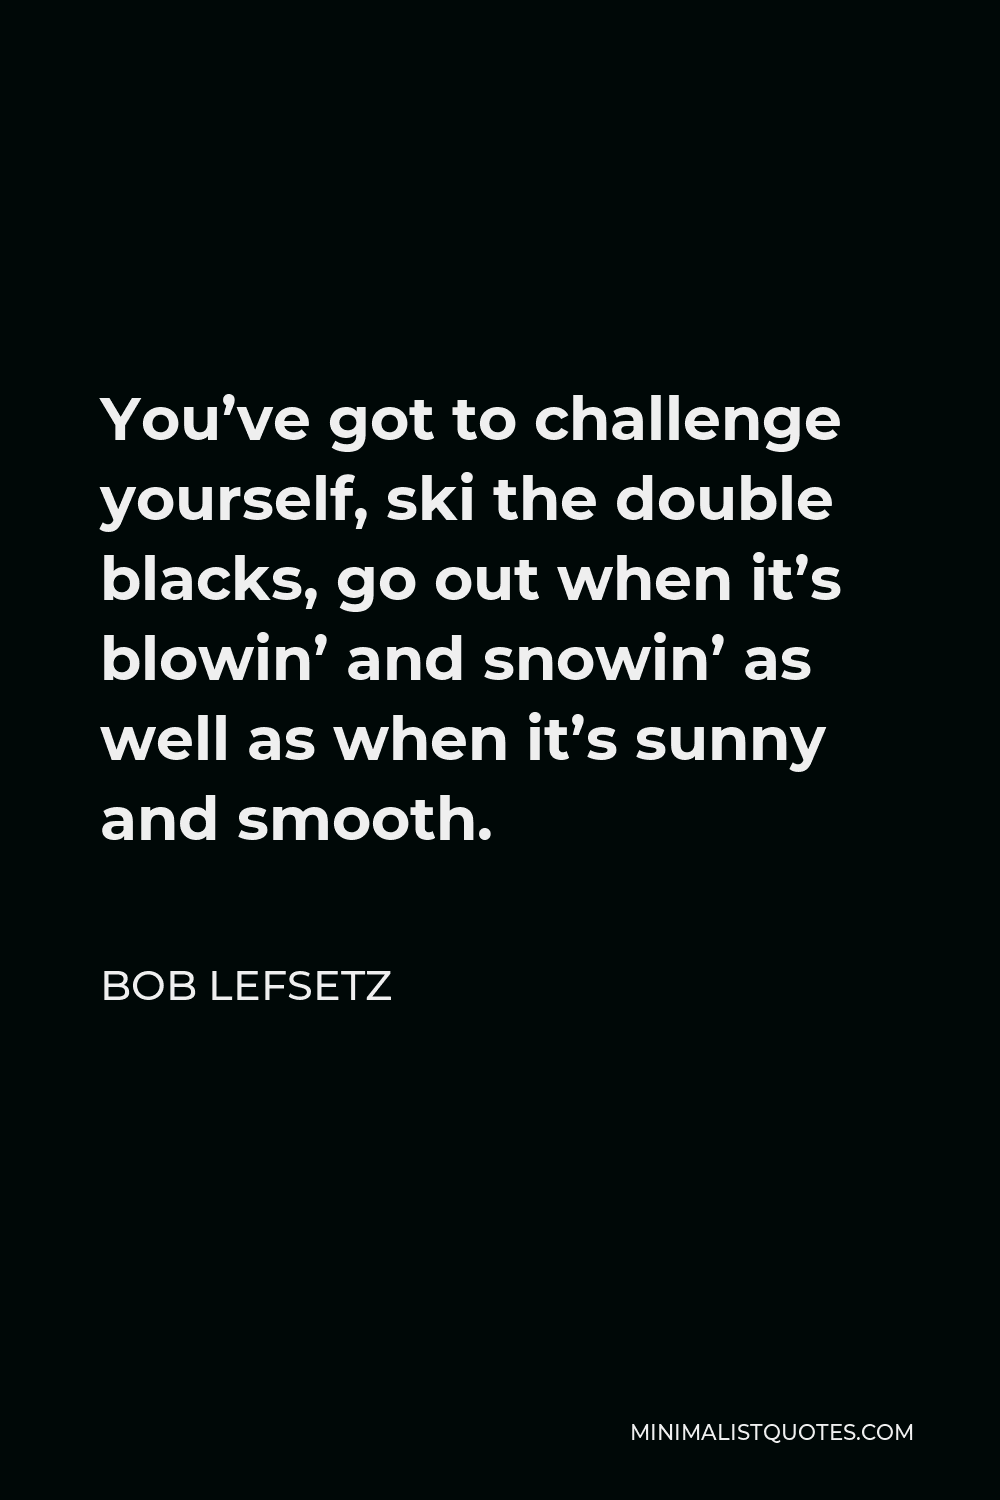 Bob Lefsetz Quote - You’ve got to challenge yourself, ski the double blacks, go out when it’s blowin’ and snowin’ as well as when it’s sunny and smooth.